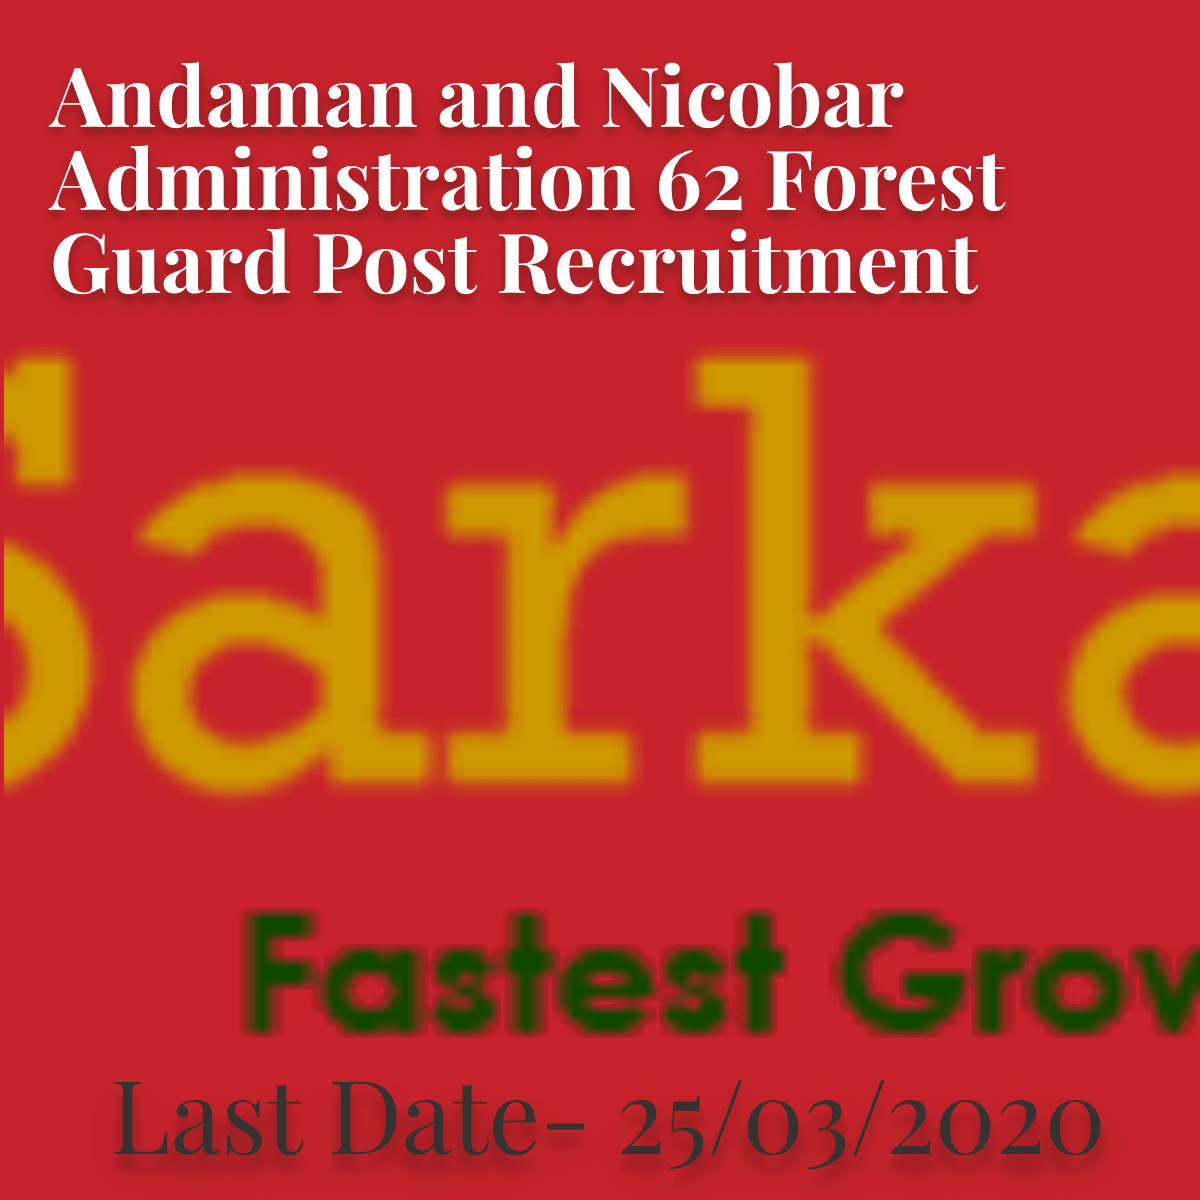 Andaman and Nicobar Administration Recruitment 2020 For Forest Guard Post